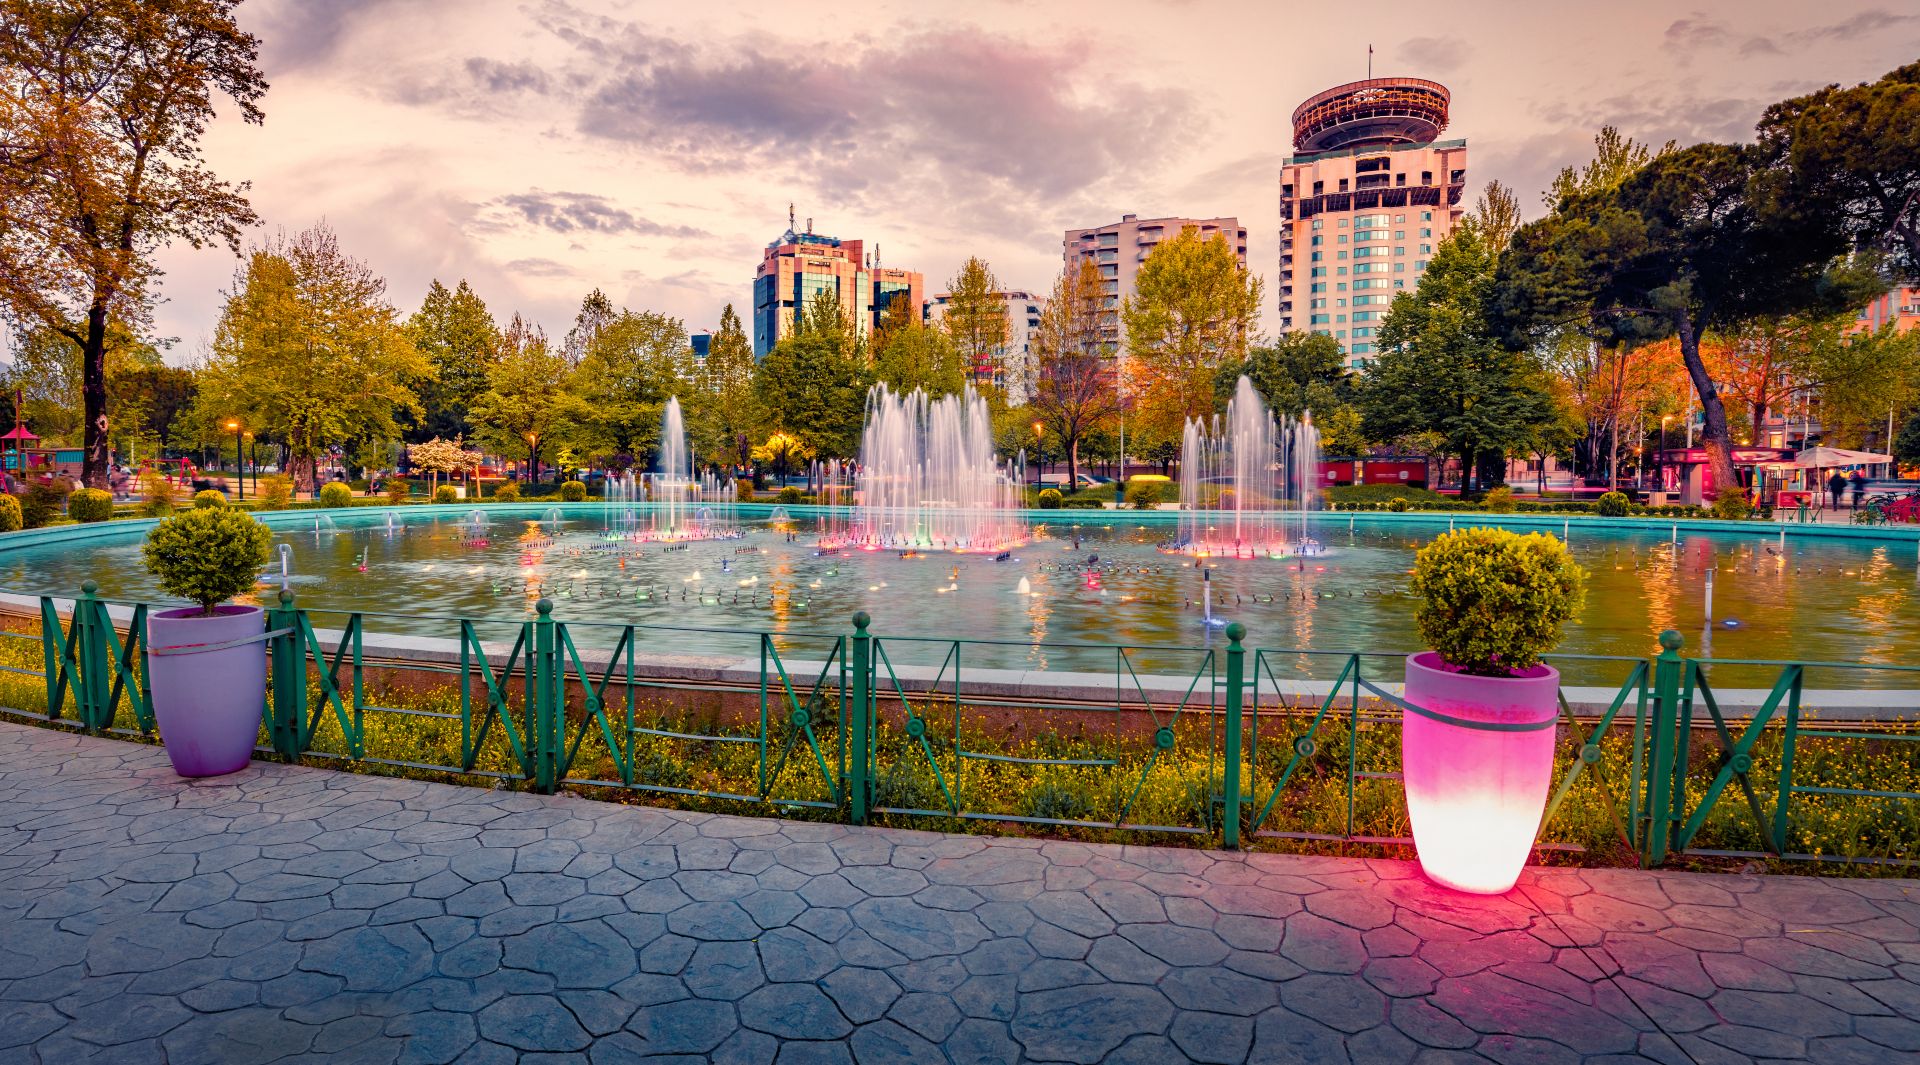 Spectacular spring view of Scanderbeg square with illuminated fountain